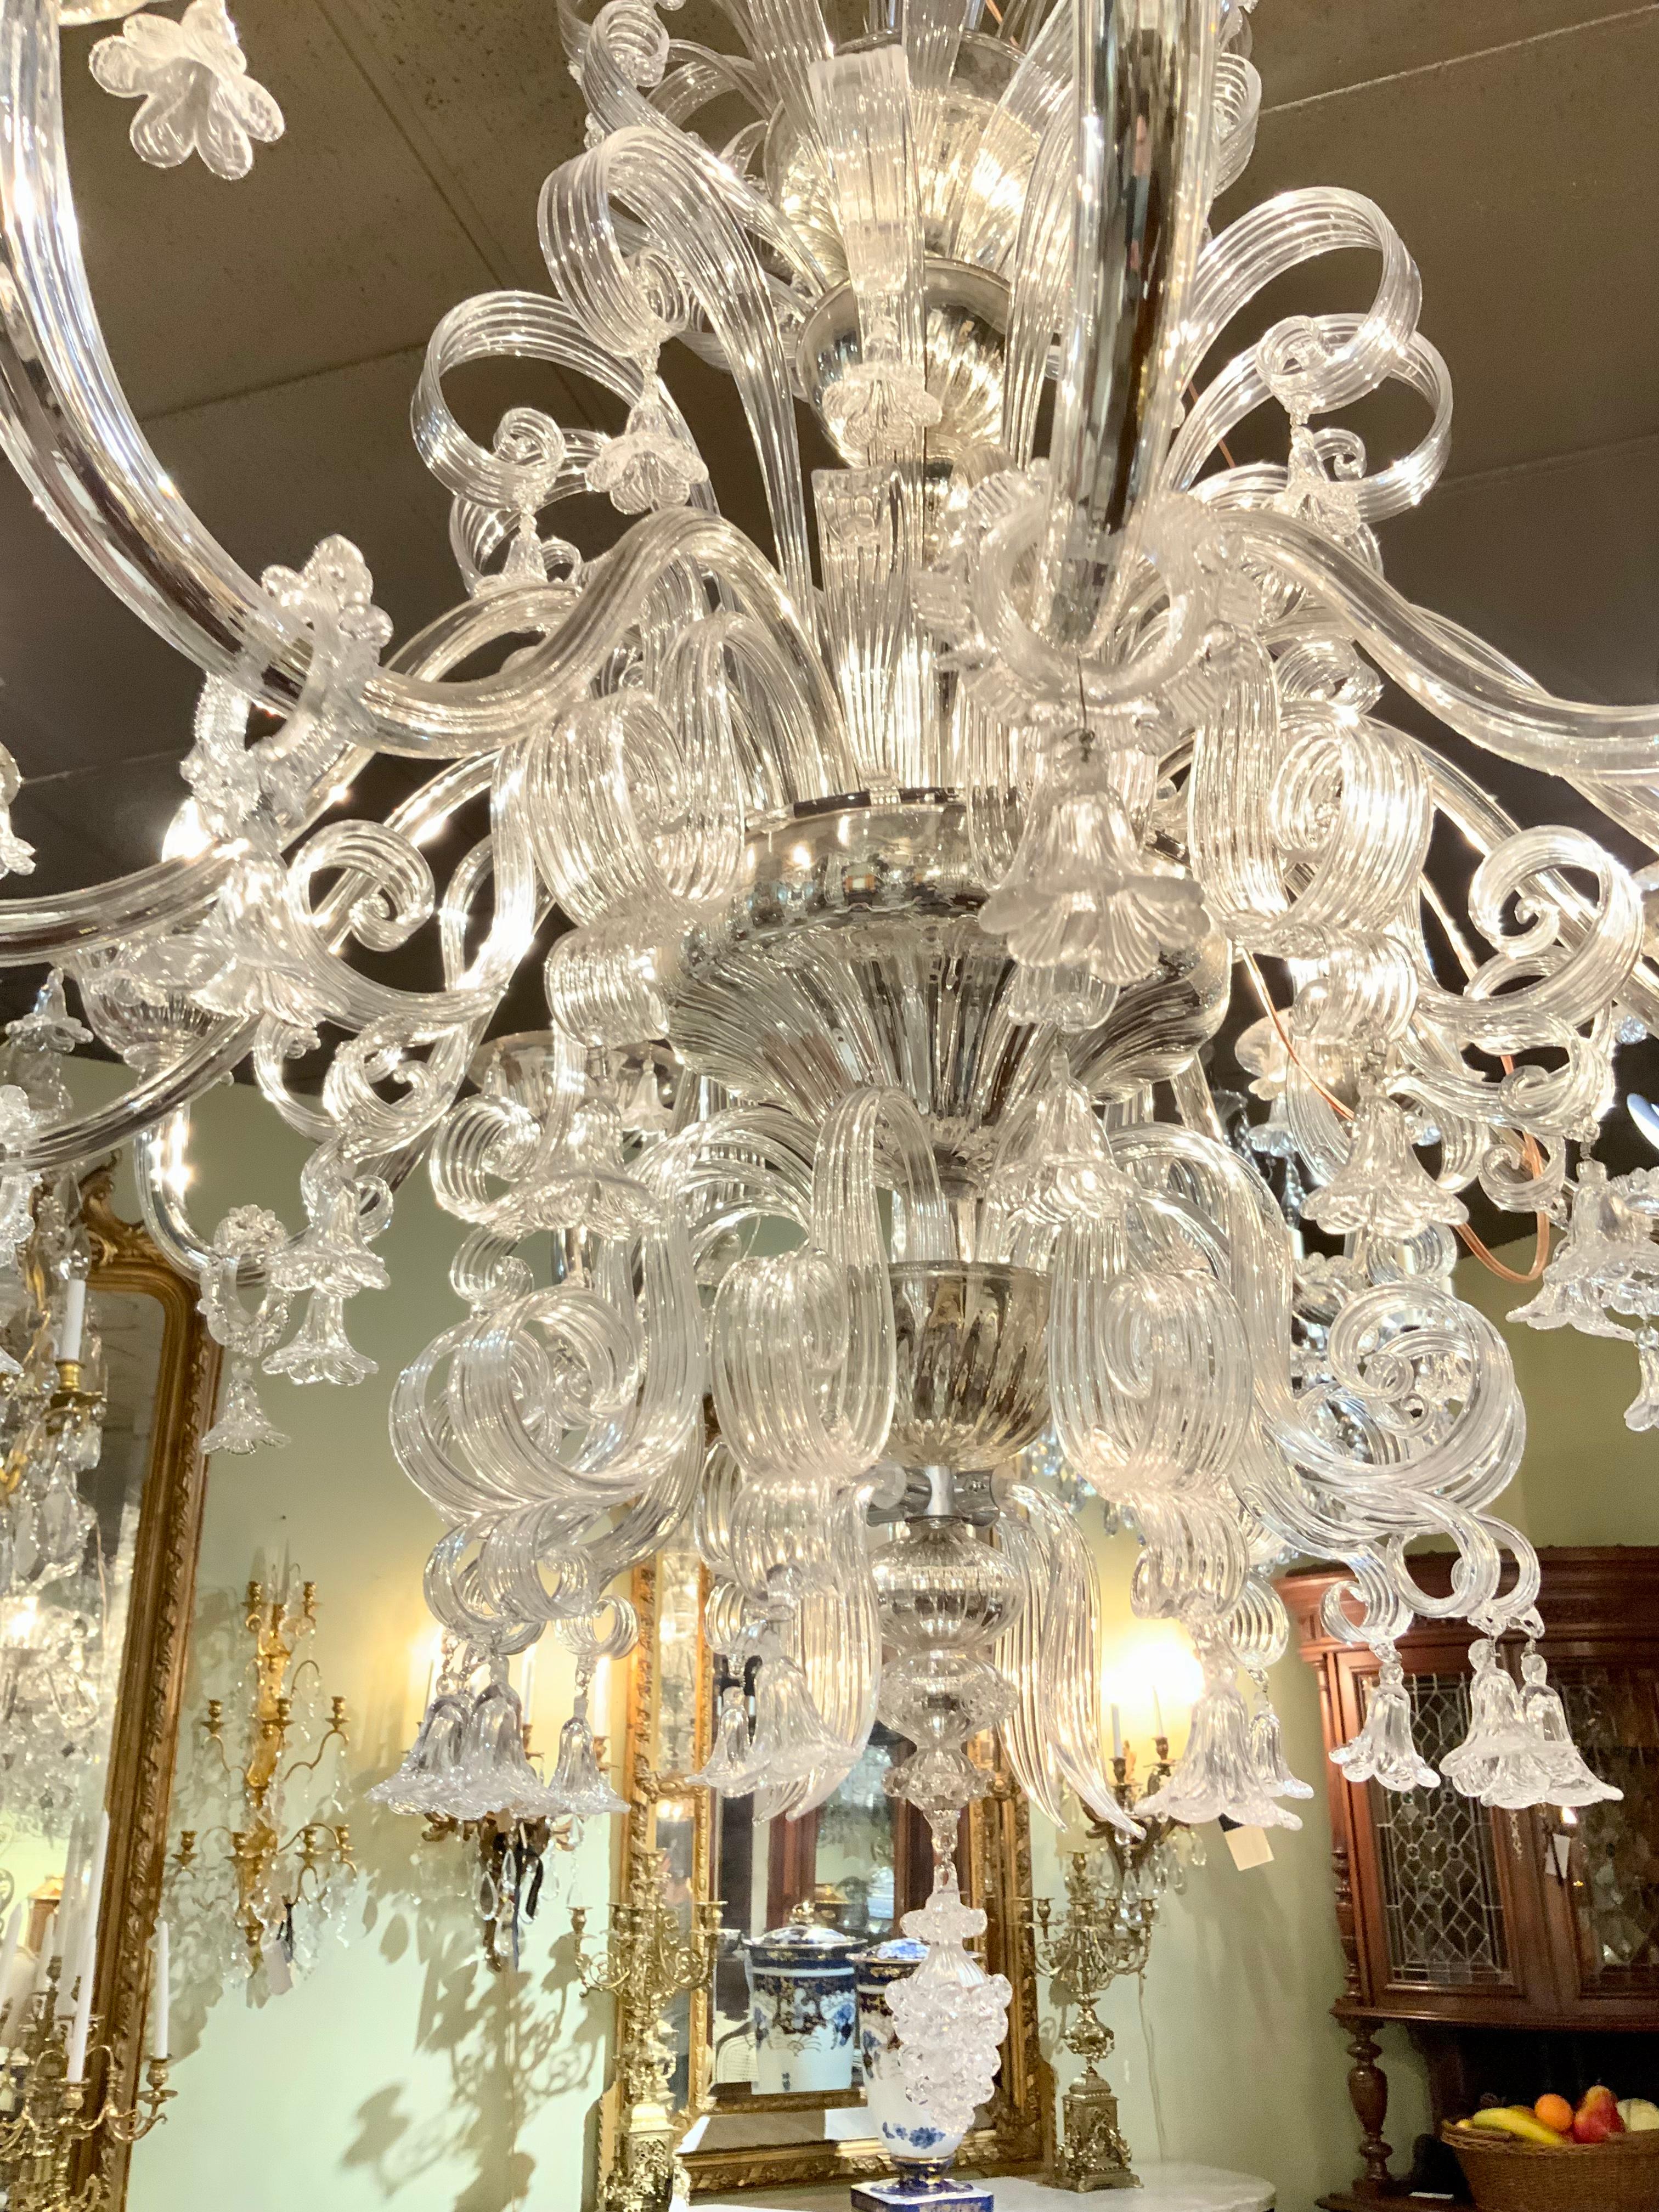 Italian Large Murano Andromeda International Mirrored Glass “Le Roy” Chandelier For Sale